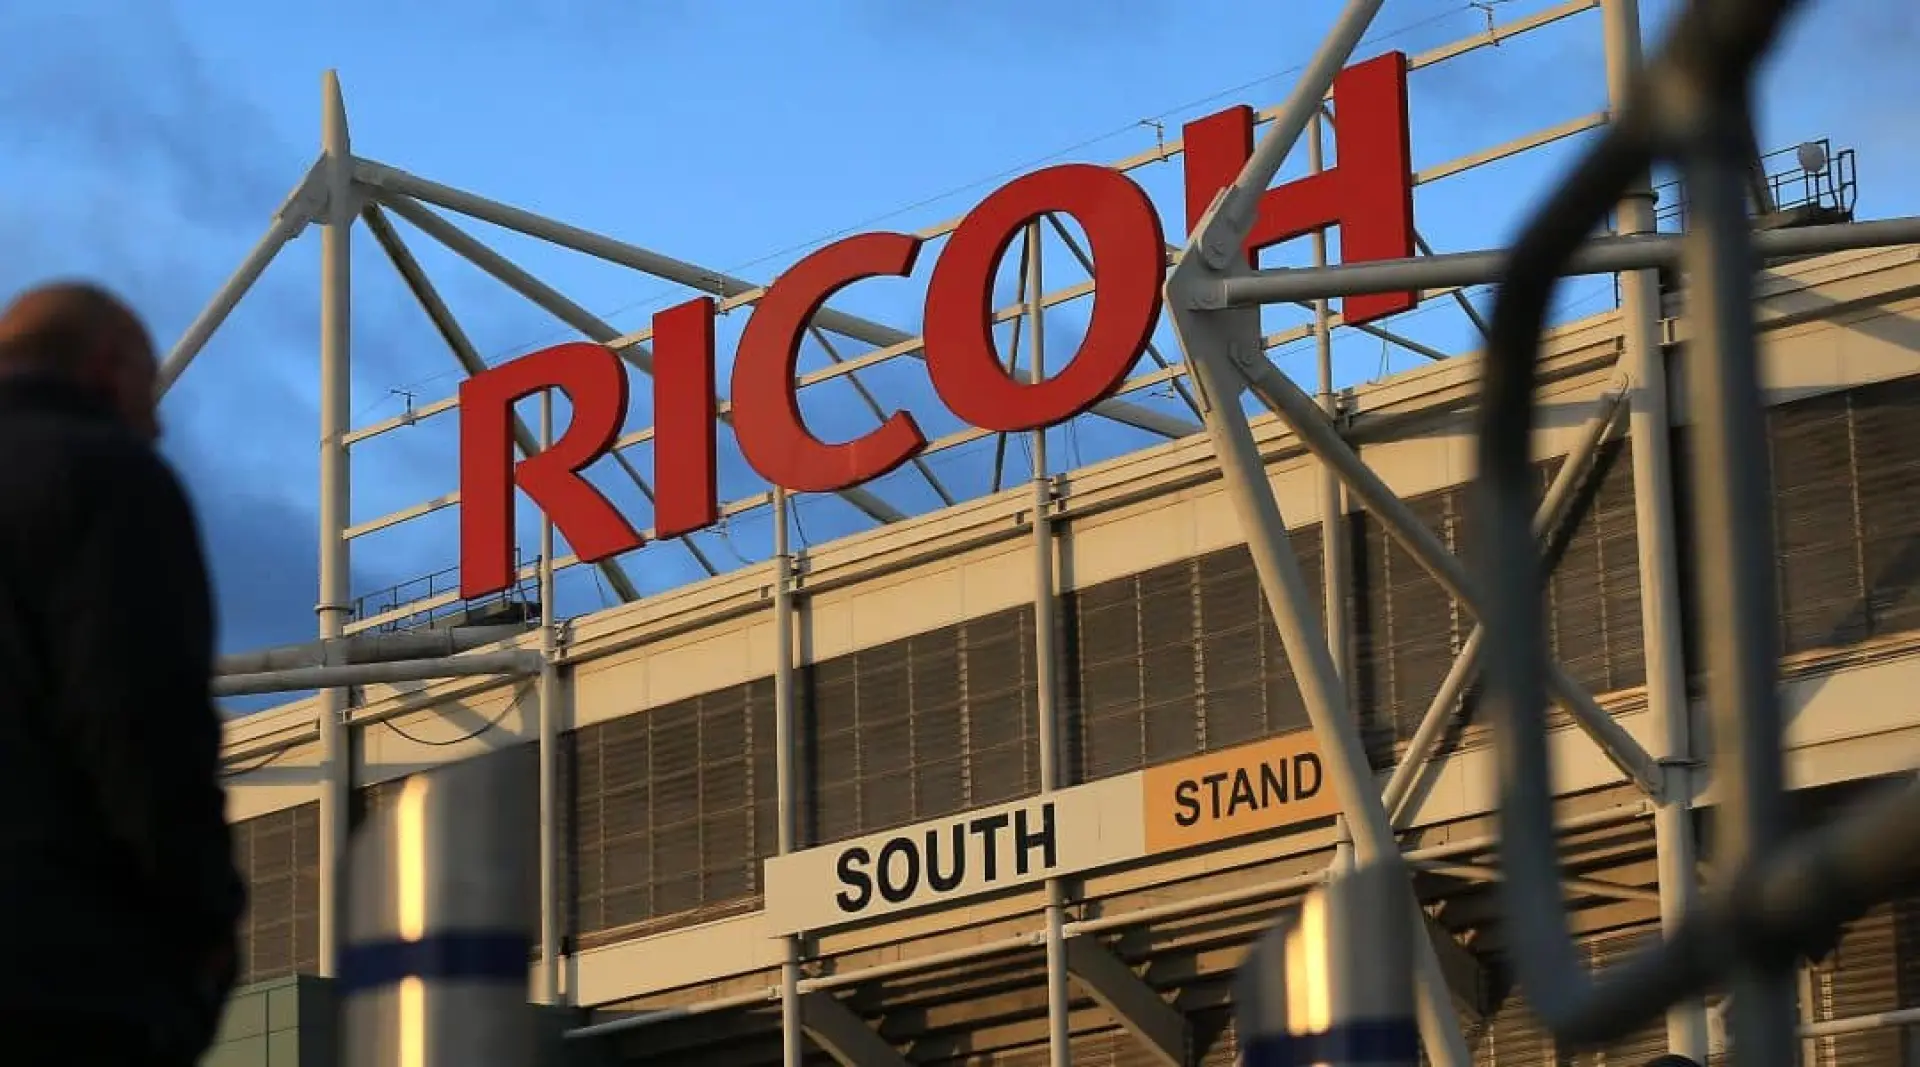 Ricoh Arena - Coventry